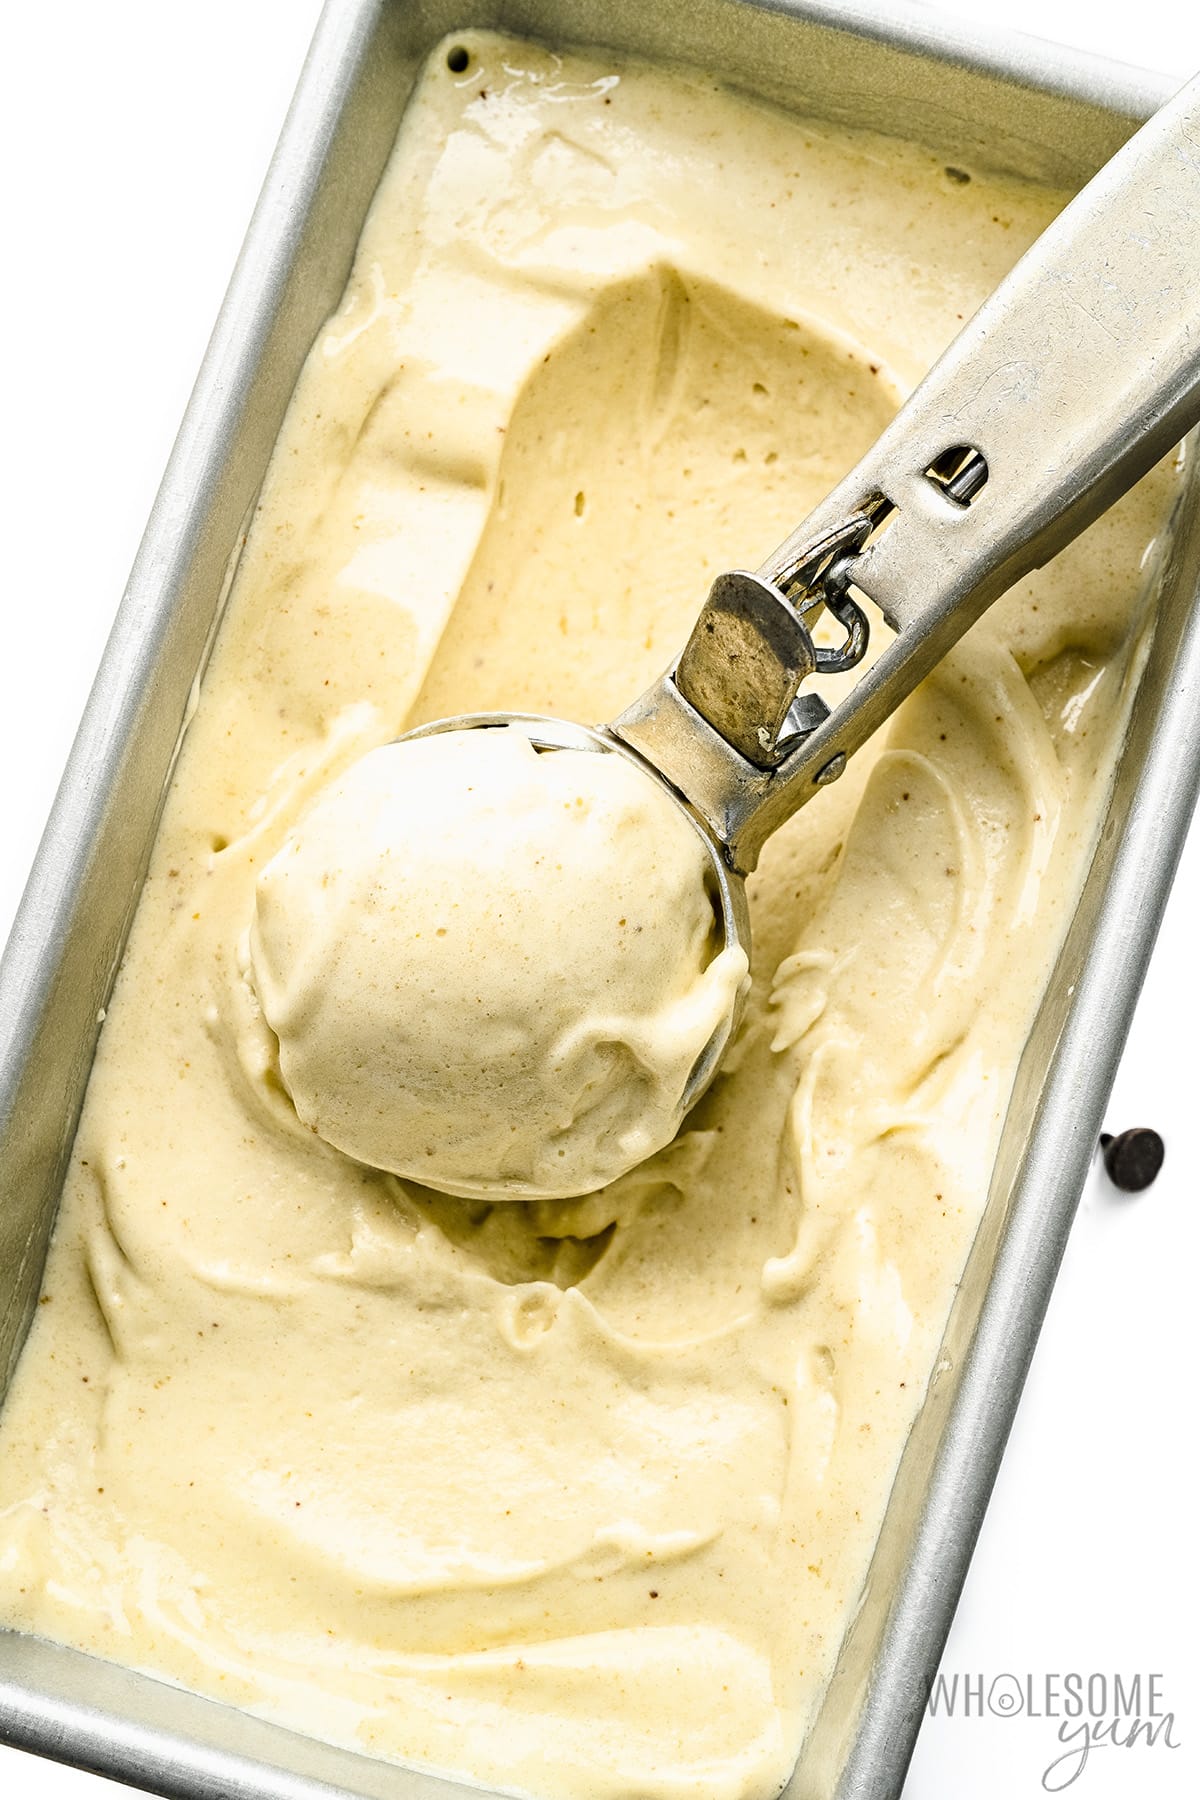 Banana ice cream in an ice cream container.